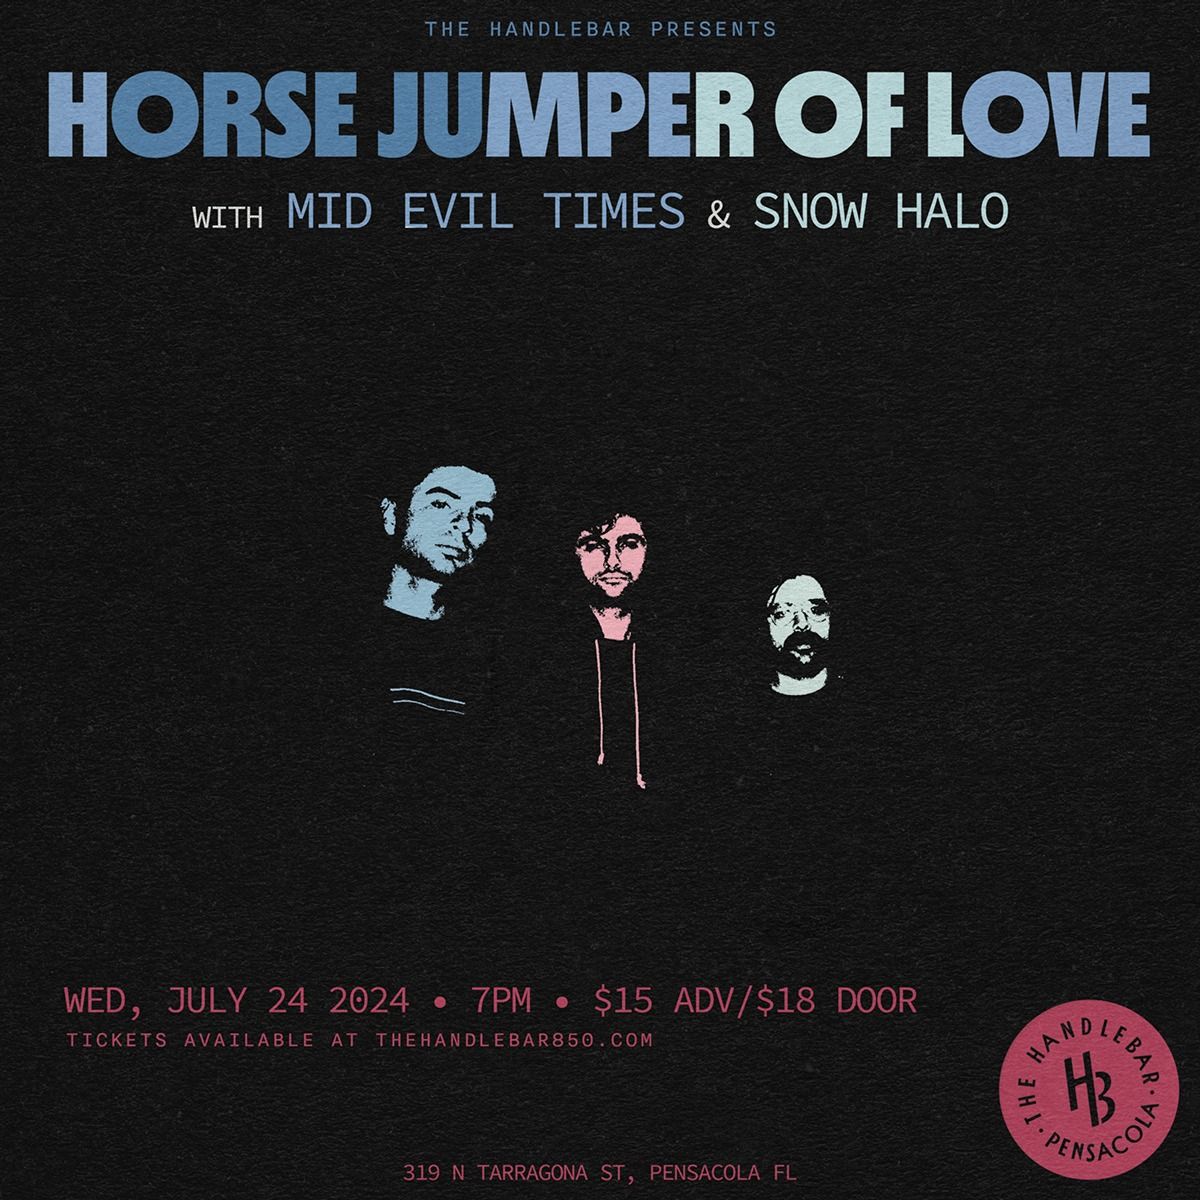 7\/24- Horse Jumper of Love, Mid Evil Times, Snow Halo